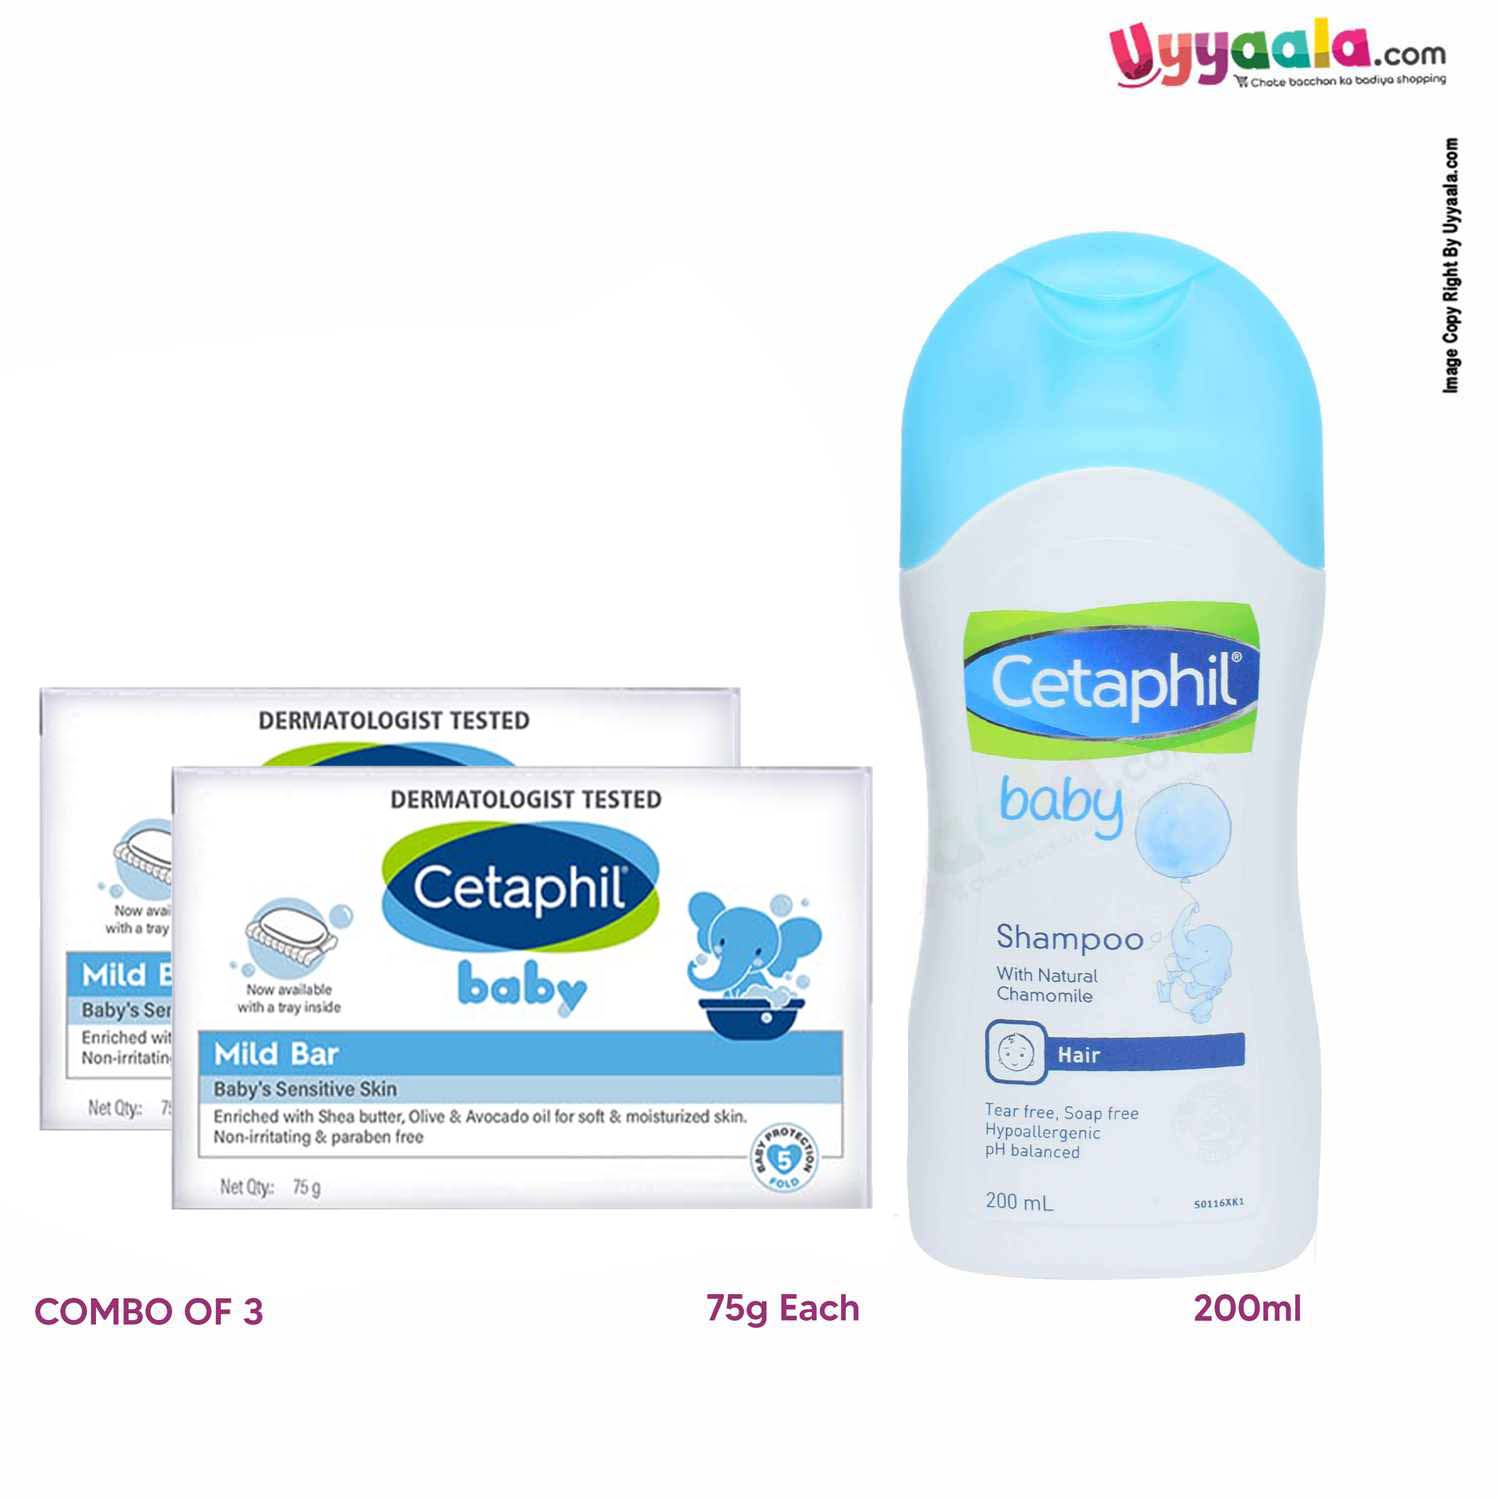 CETAPHIL Baby Soaps 75g (Pack of 2) & Shampoo 200ml (1) Combo pack